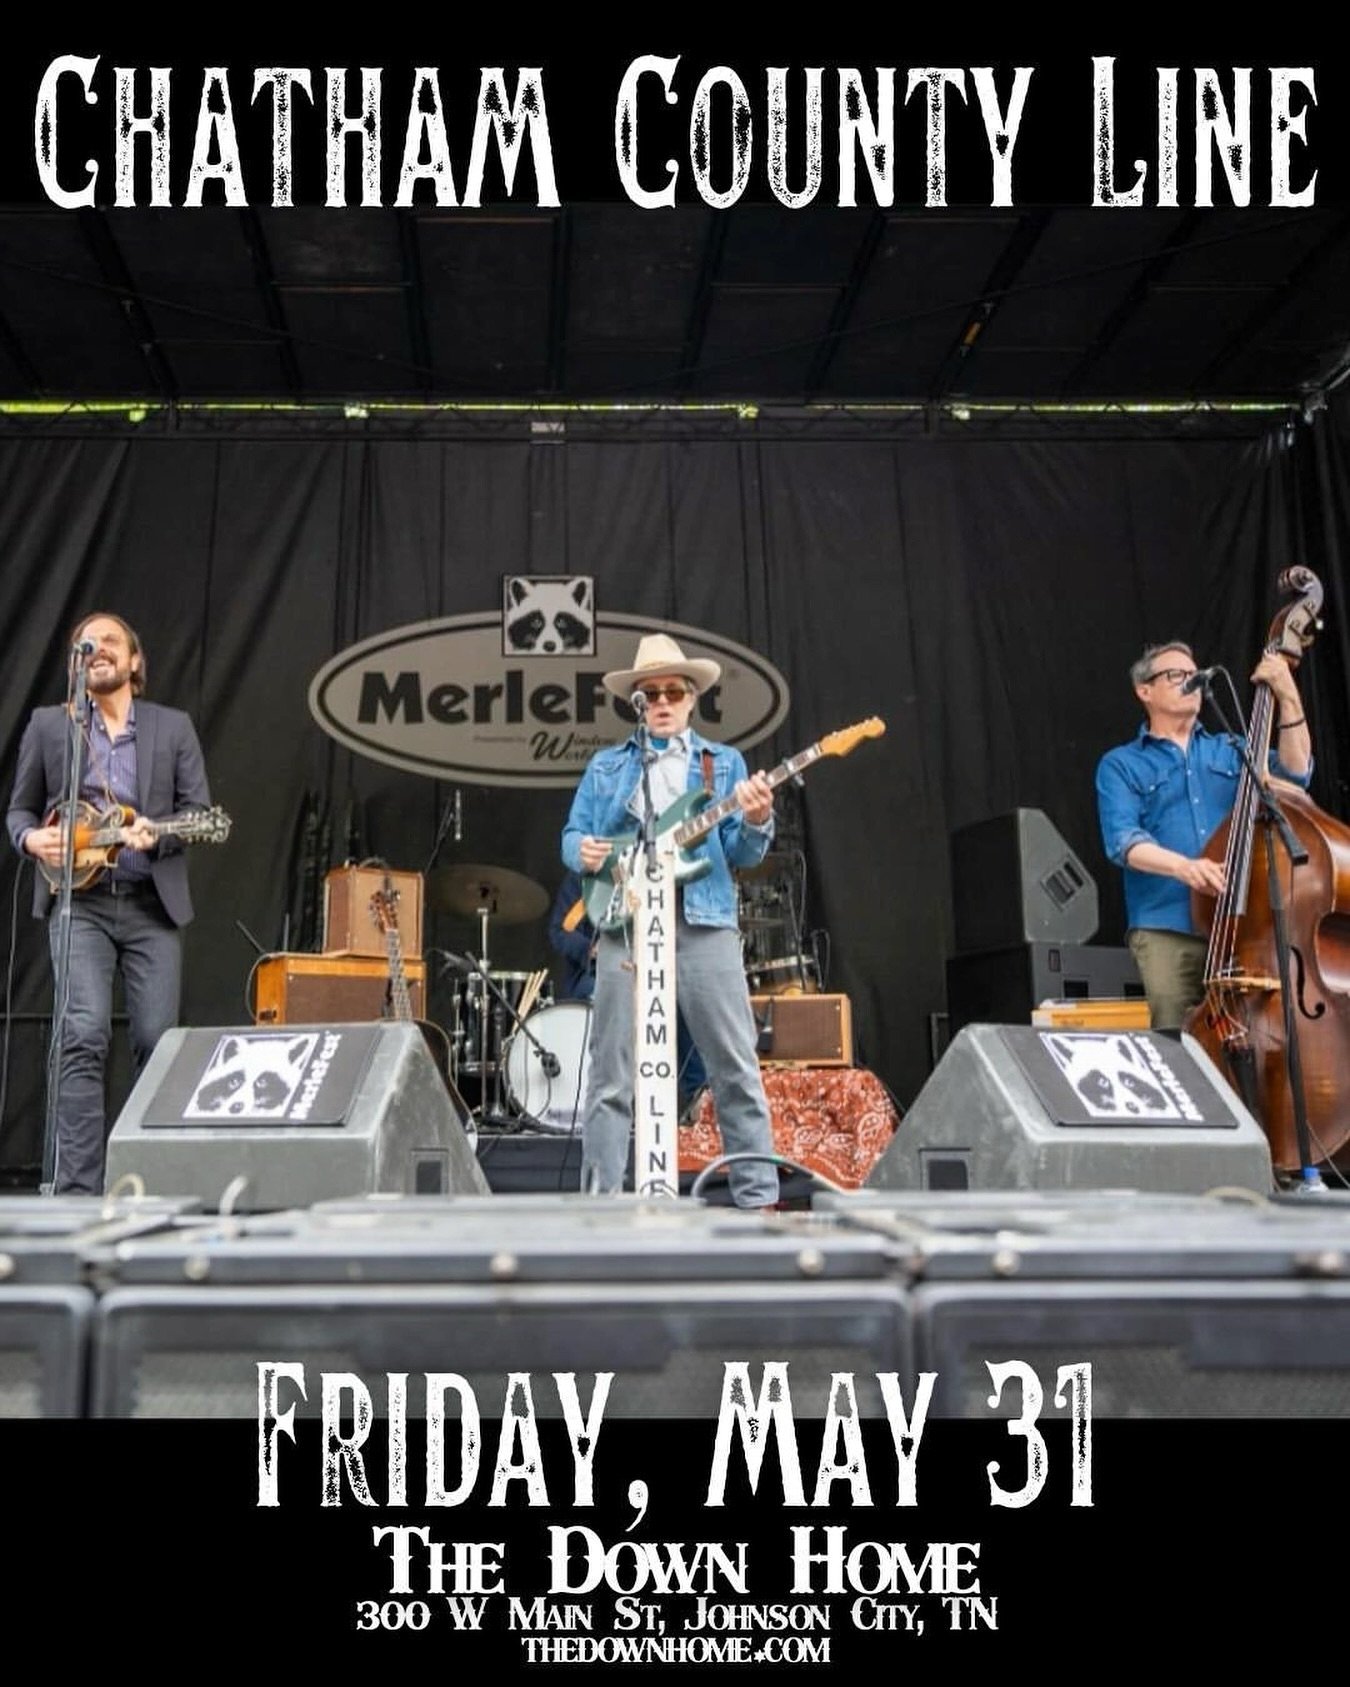 🚨Johnson City, TN! Stoked to return to @thedownhome THIS Friday, May 31. It&rsquo;s been a minute since we last played The Down Home and we can&rsquo;t wait to get back. See yall this Friday! 
Ticket link below ⬇️ 

Come close out the month of May w